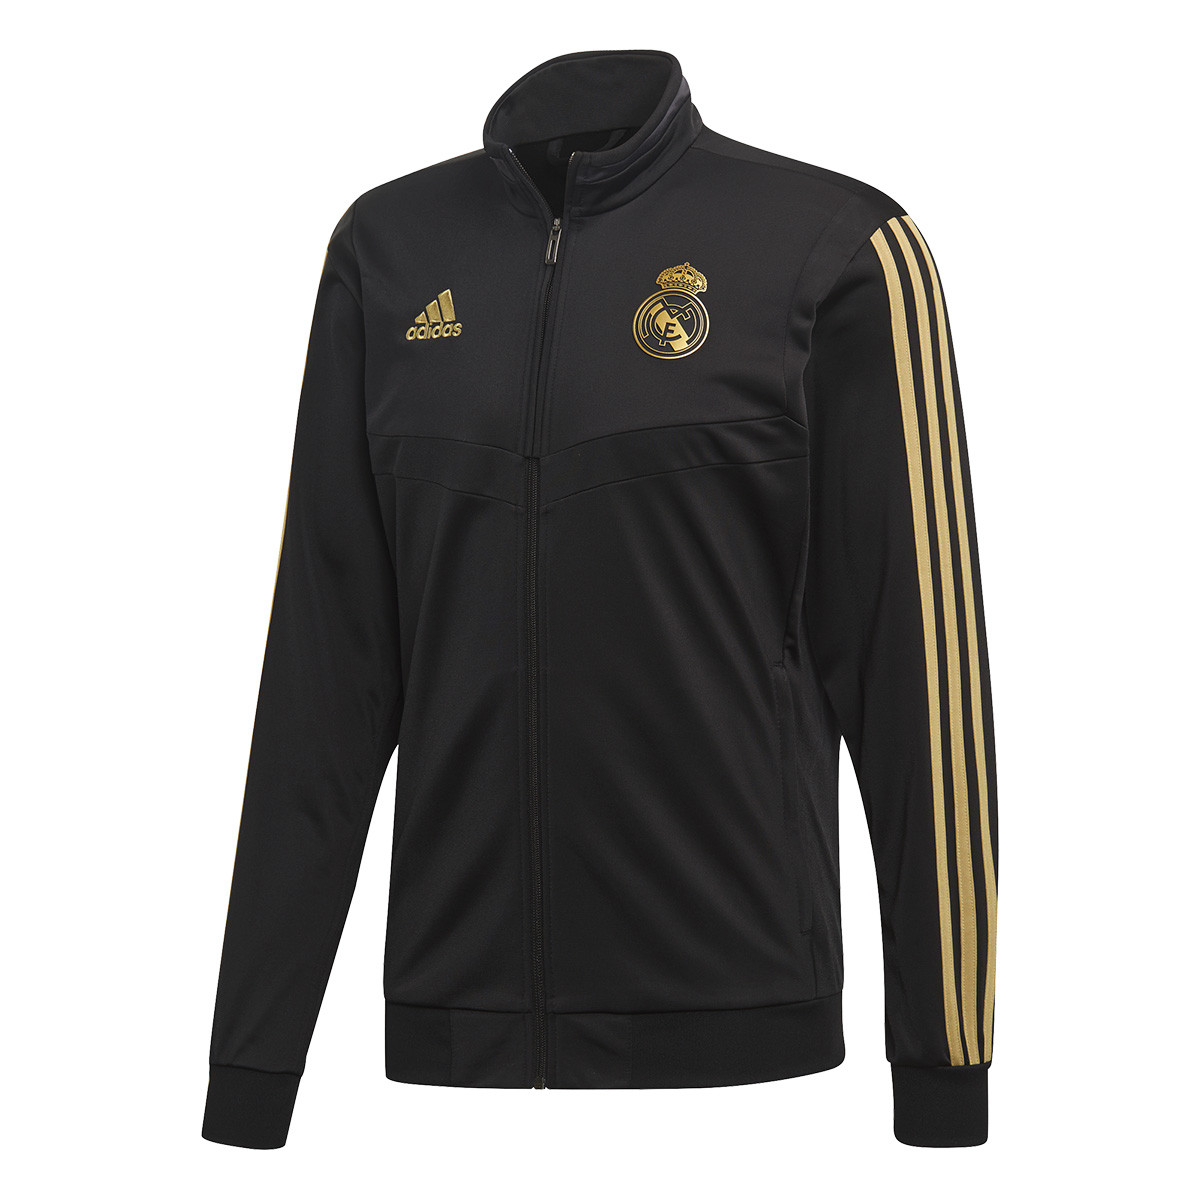 chandal hombre real madrid 2019